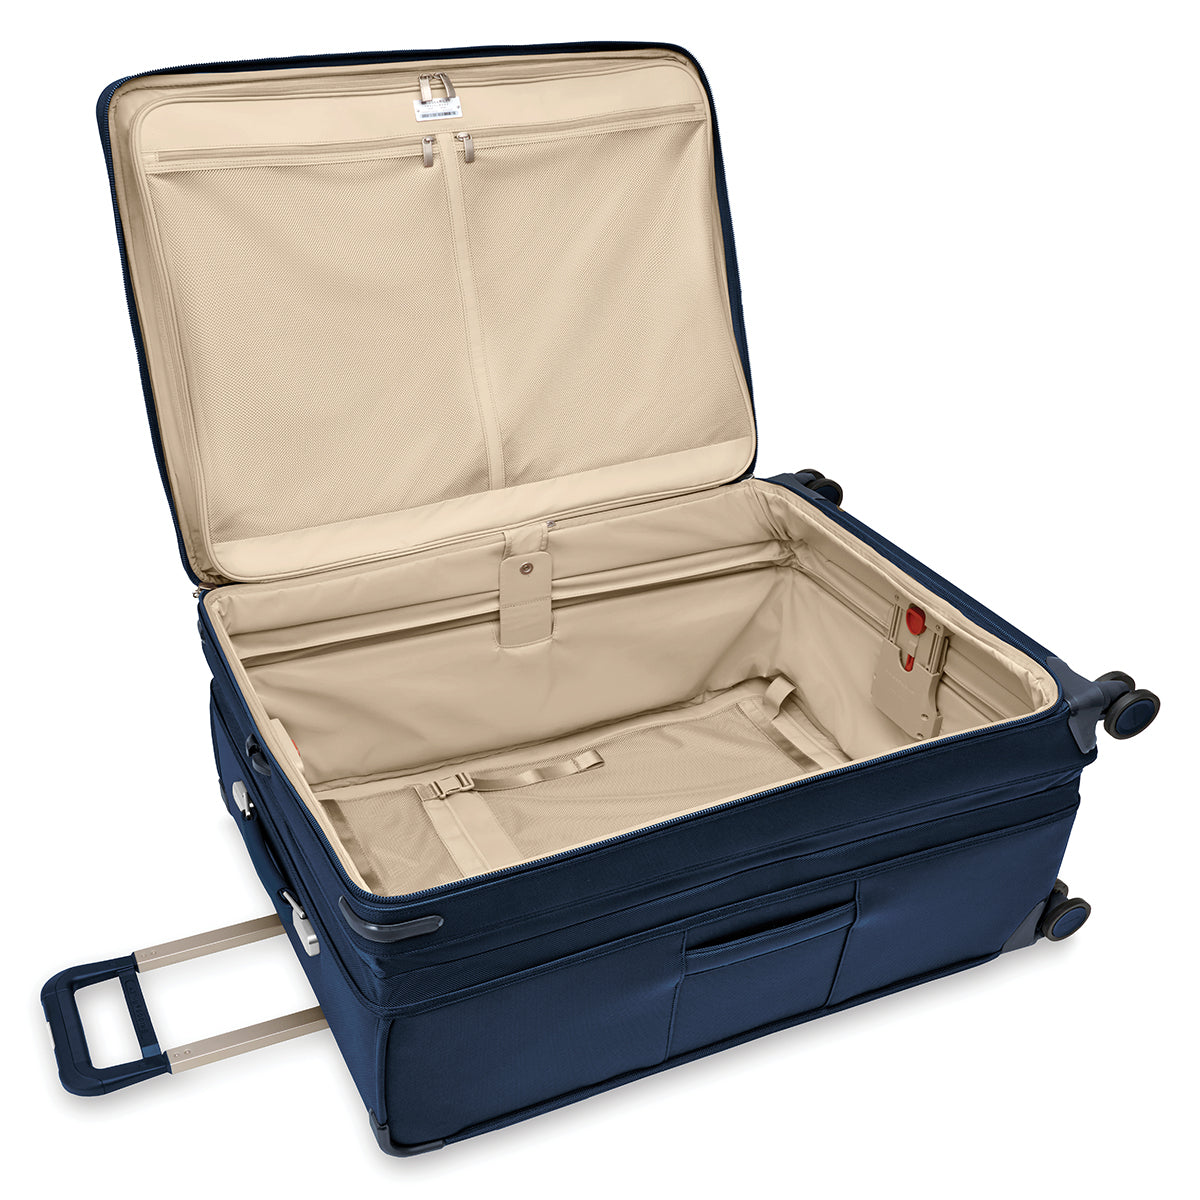 Briggs & Riley Baseline Extra Large Expandable Spinner